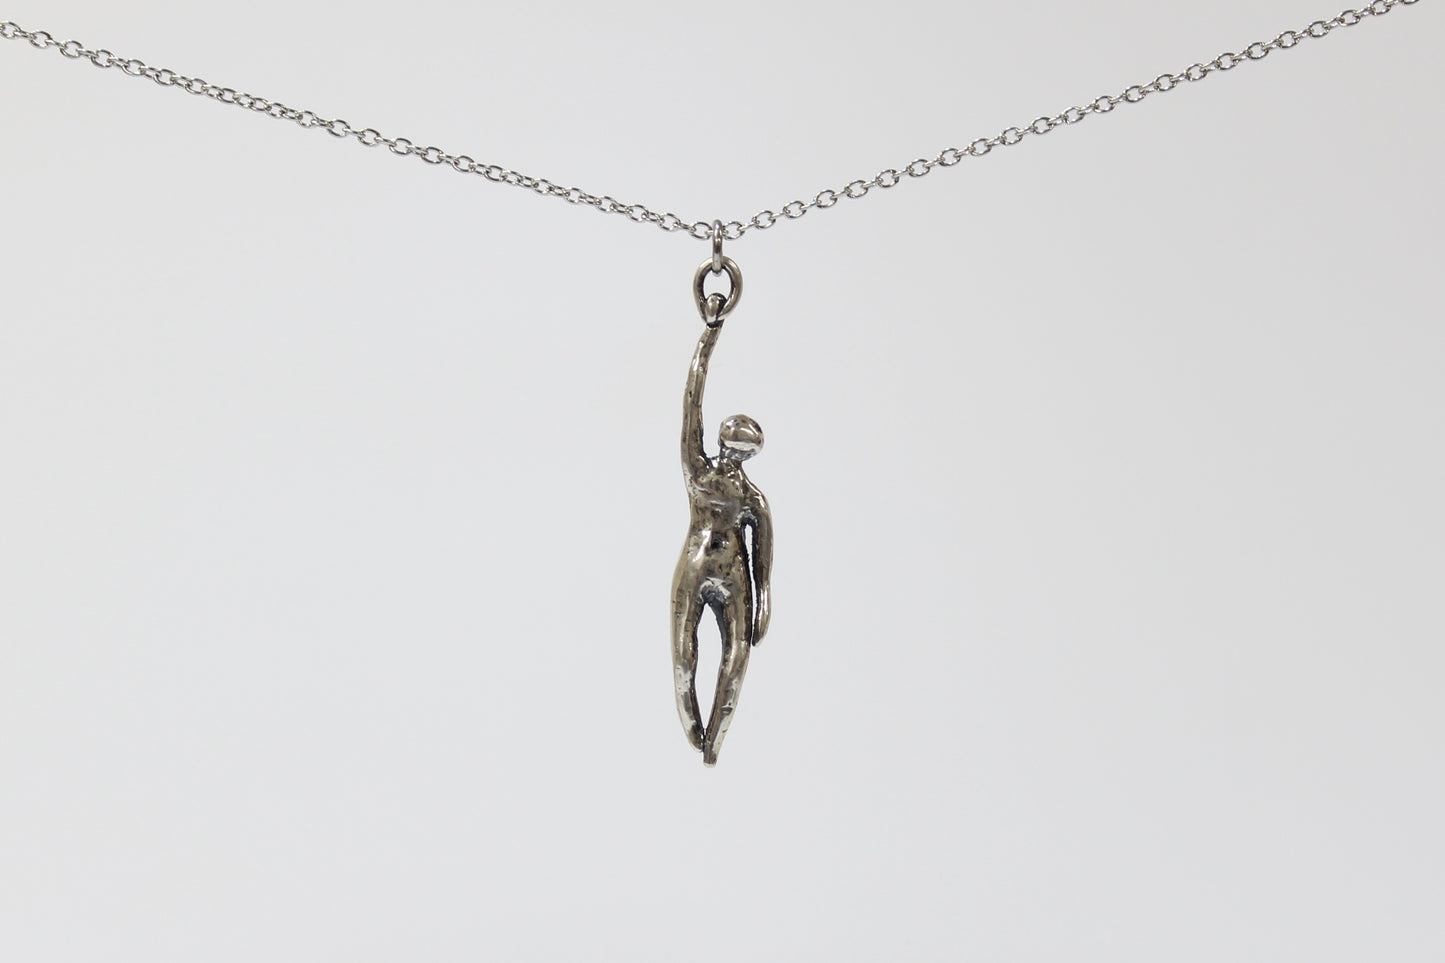 SILVER Hang in There Buddy (looking up) Pendant Necklace. Sterling silver. 1 1/2" x 1/2". Select chain length 16, 18, 20 inch